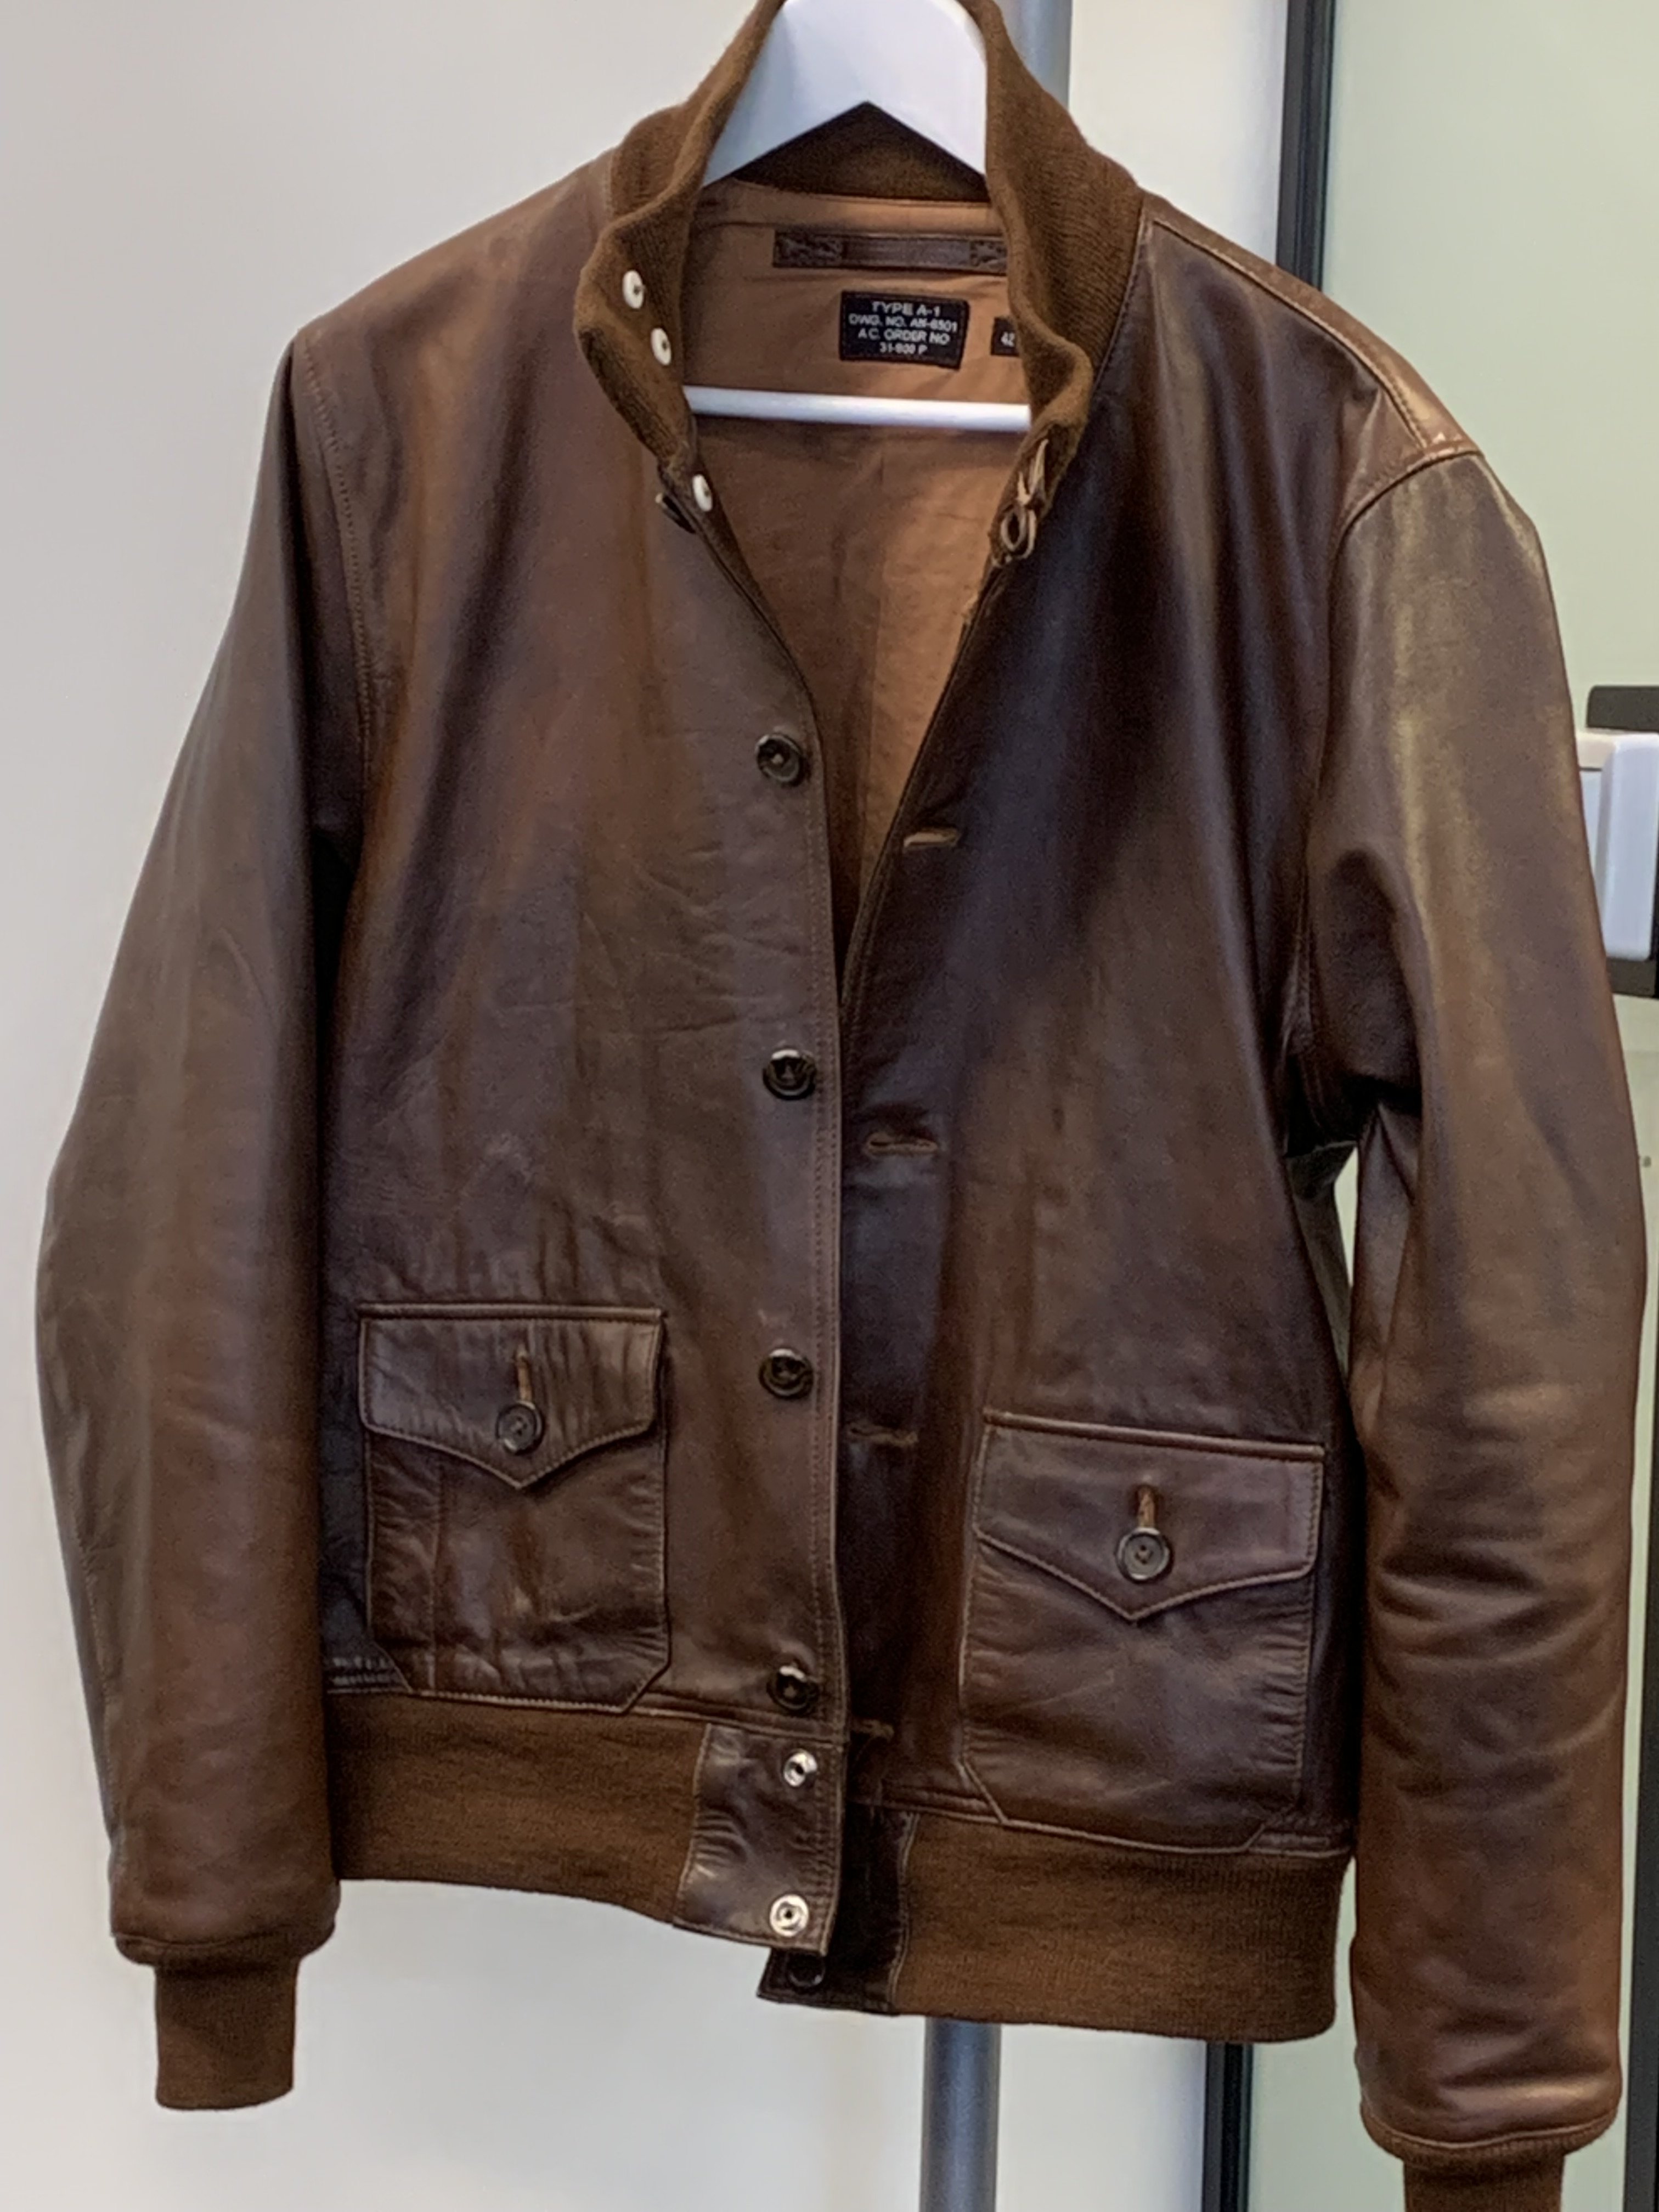 Let‘s see some A1‘s | Page 3 | Vintage Leather Jackets Forum